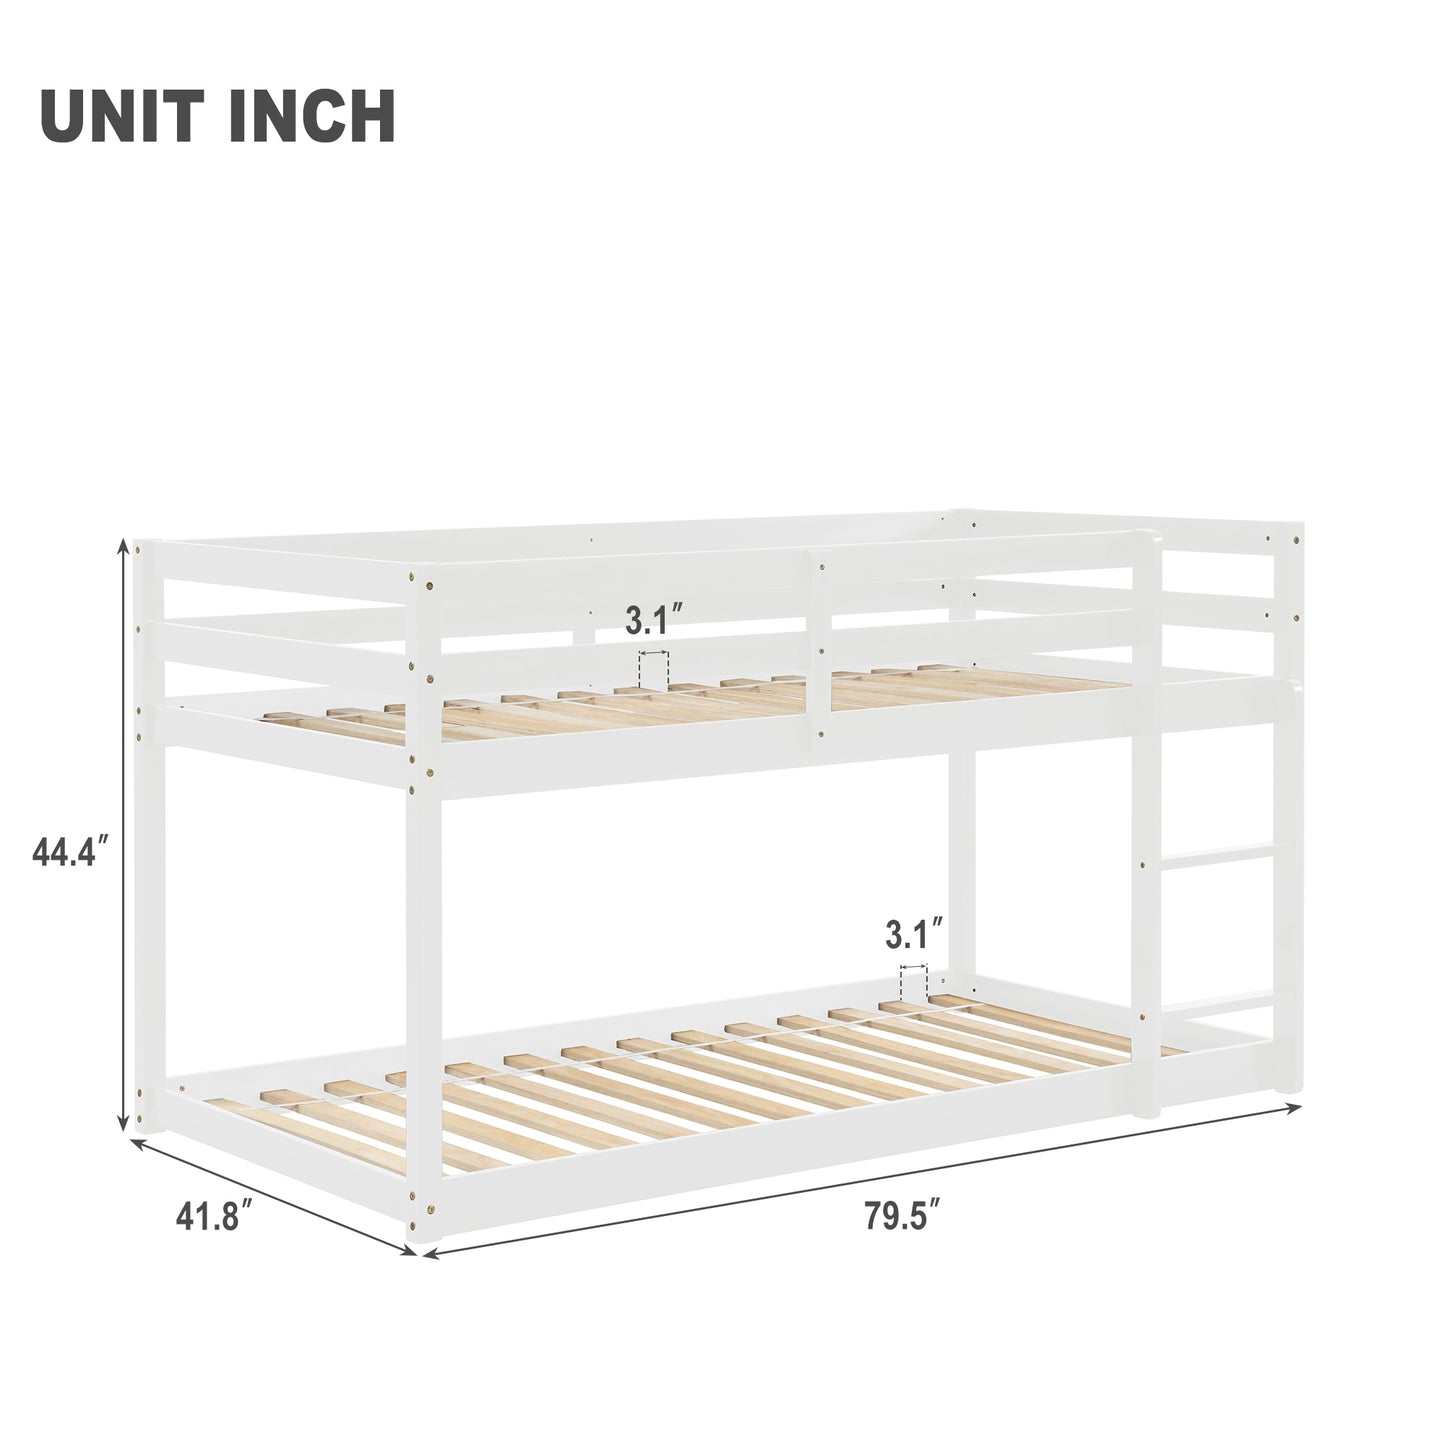 BTMWAY Low Bunk Beds for Kids, New Upgraded Twin Over Twin Floor Bunk Bed with Safety Guard Rail and Ladder